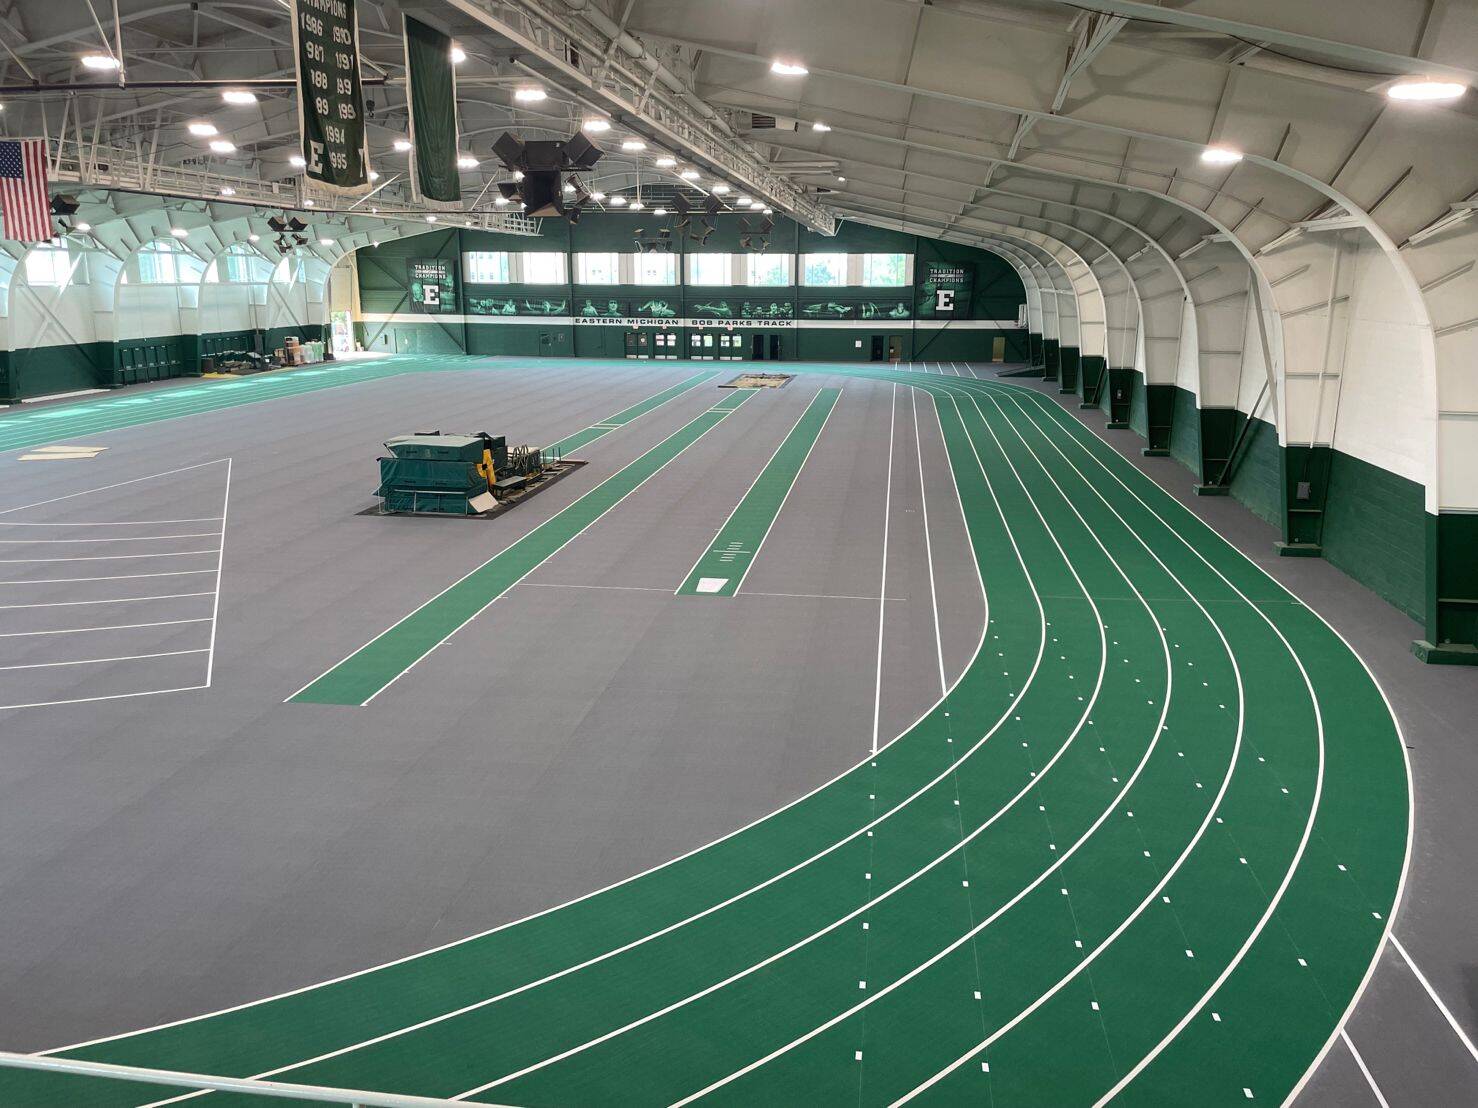 Beautifully designed track and field track that showcases a green theming and emphasizes commercial flooring